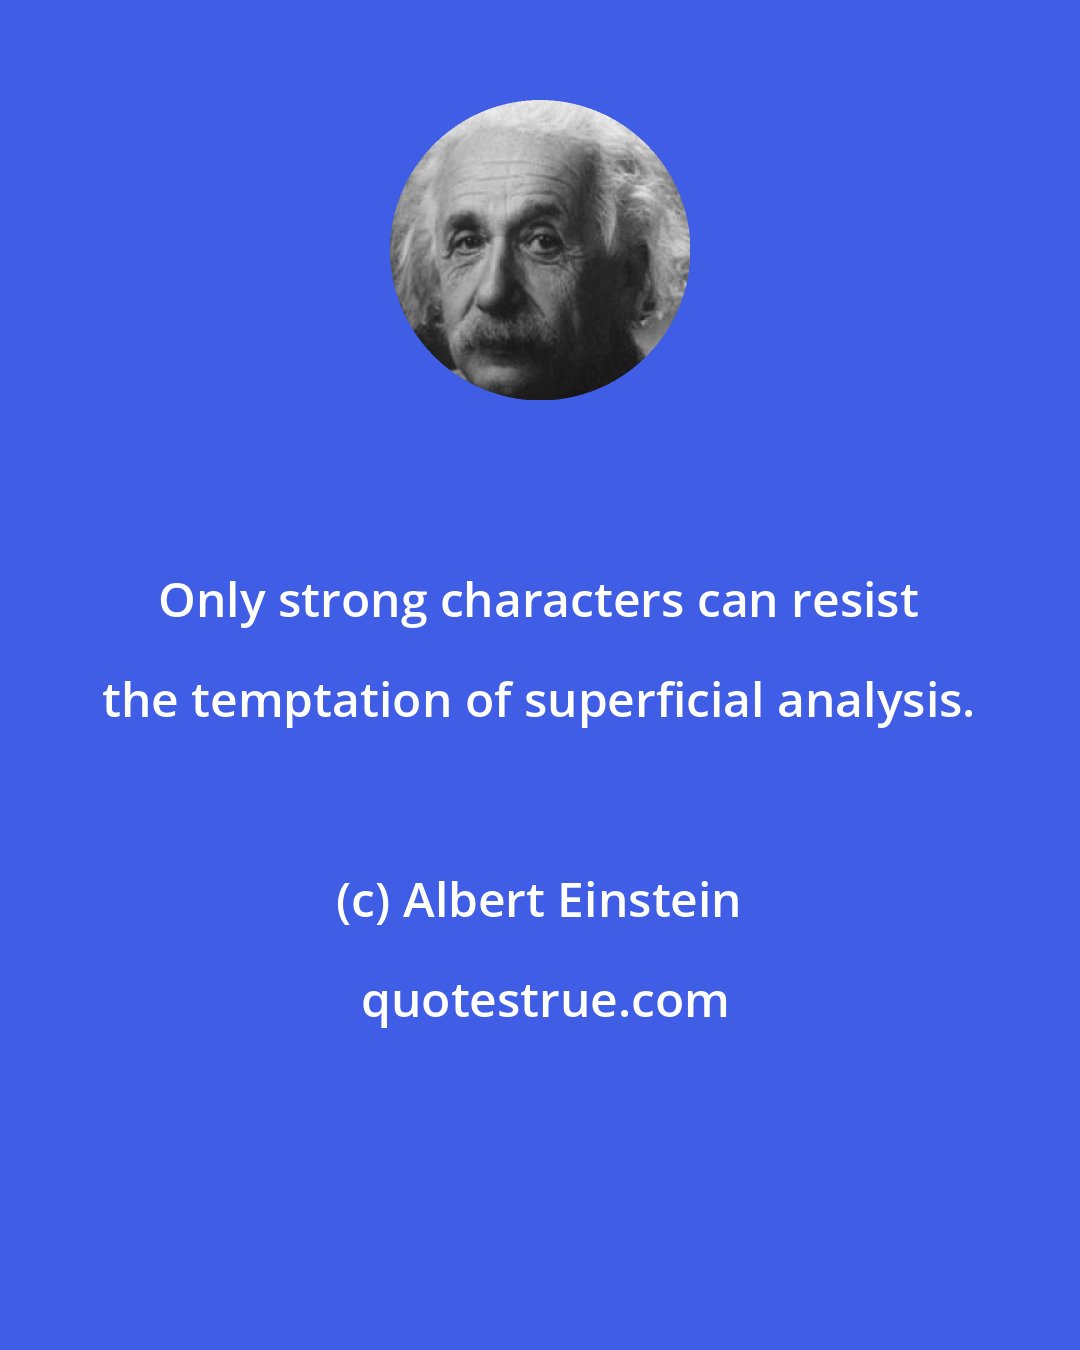 Albert Einstein: Only strong characters can resist the temptation of superficial analysis.